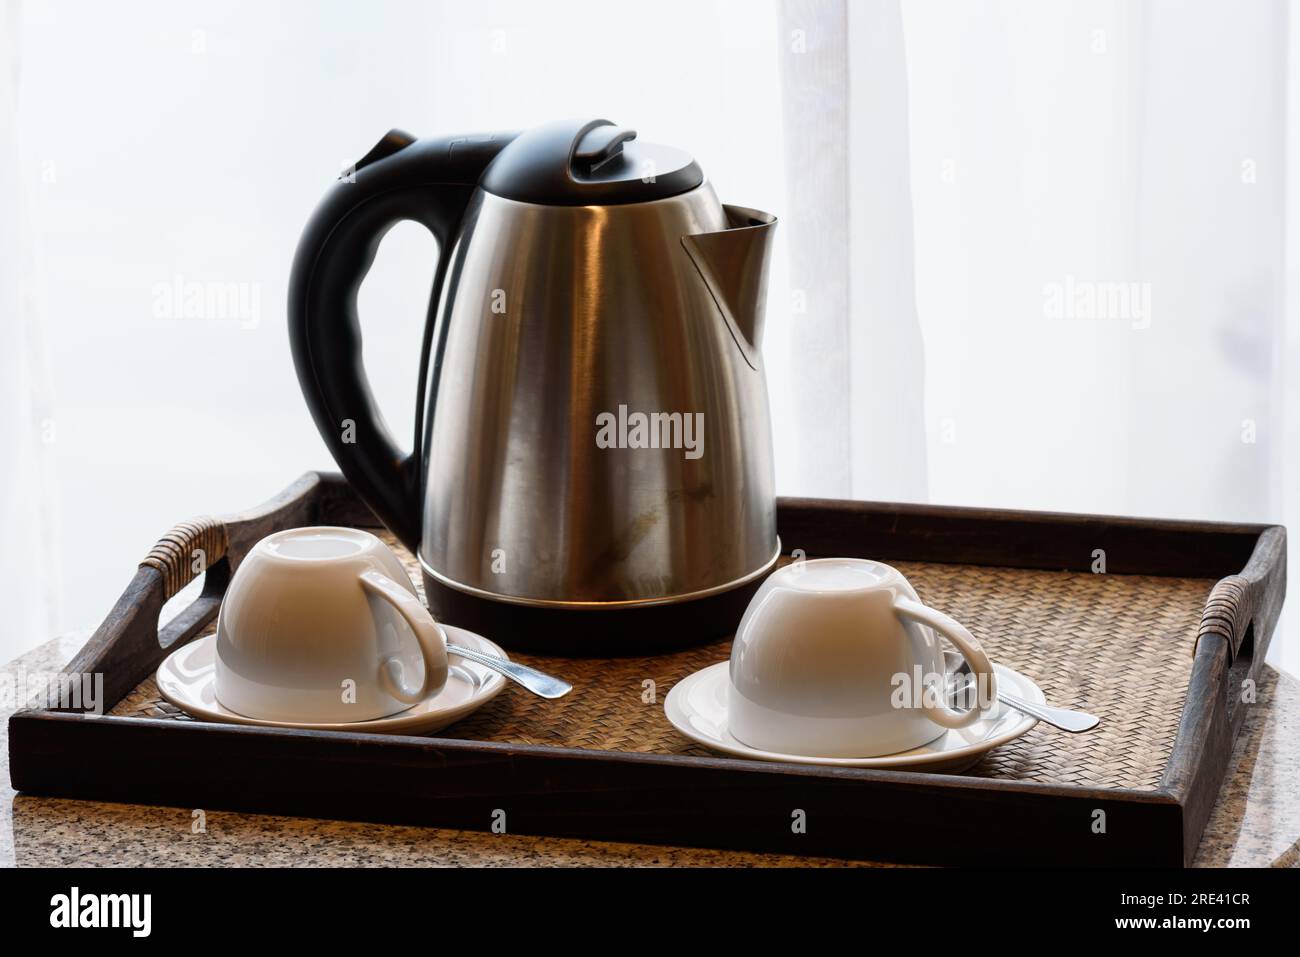 https://c8.alamy.com/comp/2RE41CR/electric-kettle-and-coffee-cup-set-in-hotel-room-ceramic-cup-set-2RE41CR.jpg